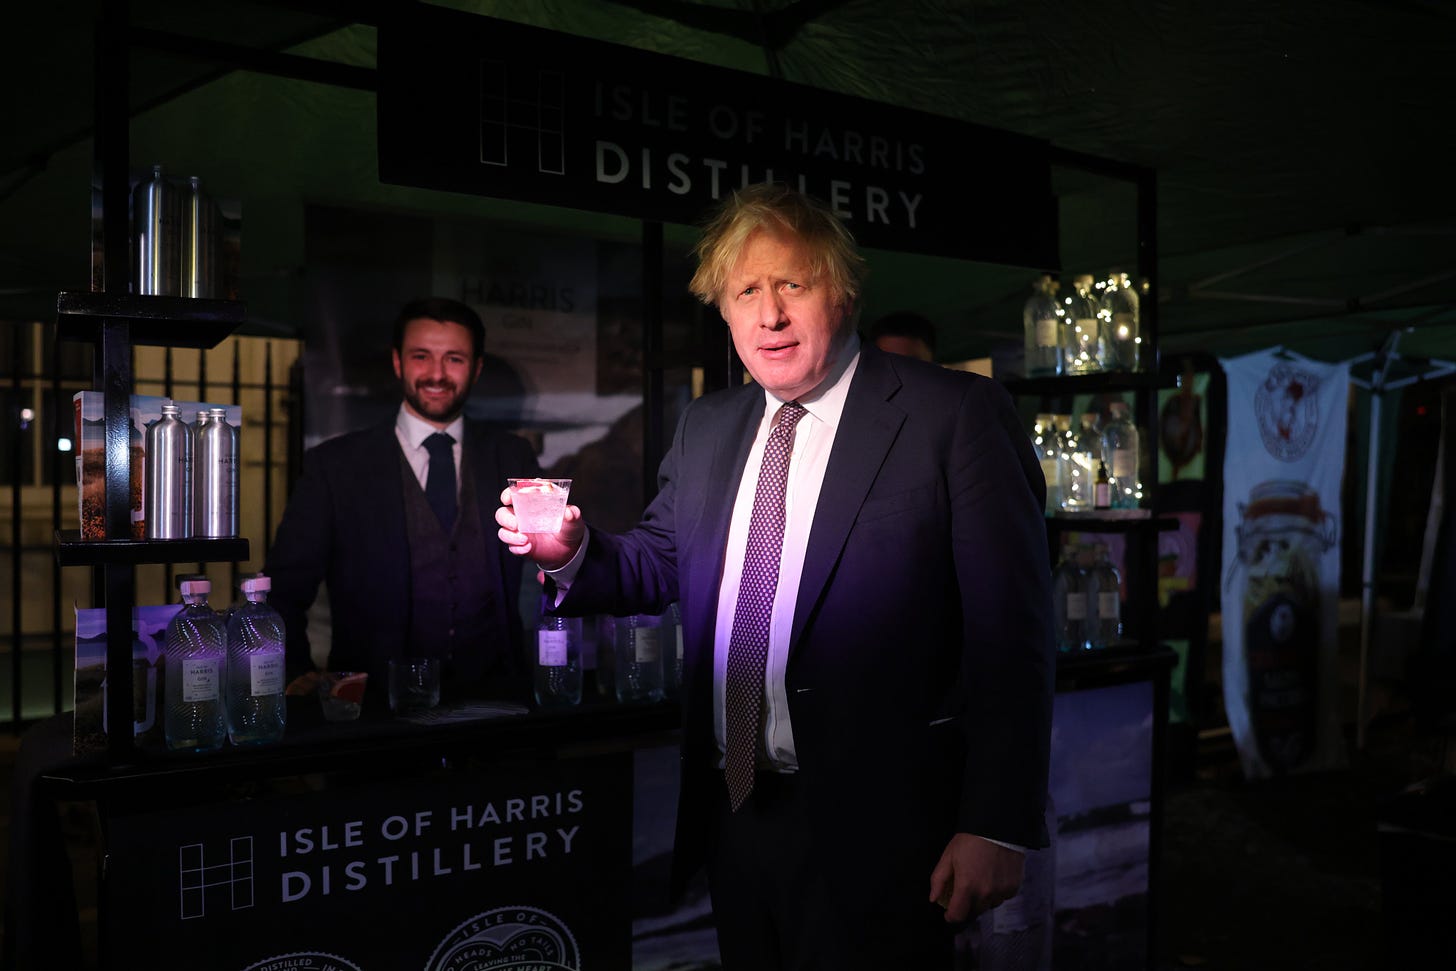 UK PM Boris Johnson stopping by food and drink stalls in Downing Street, London in earlier this month. (Image: Twitter/@10DowningStreet)